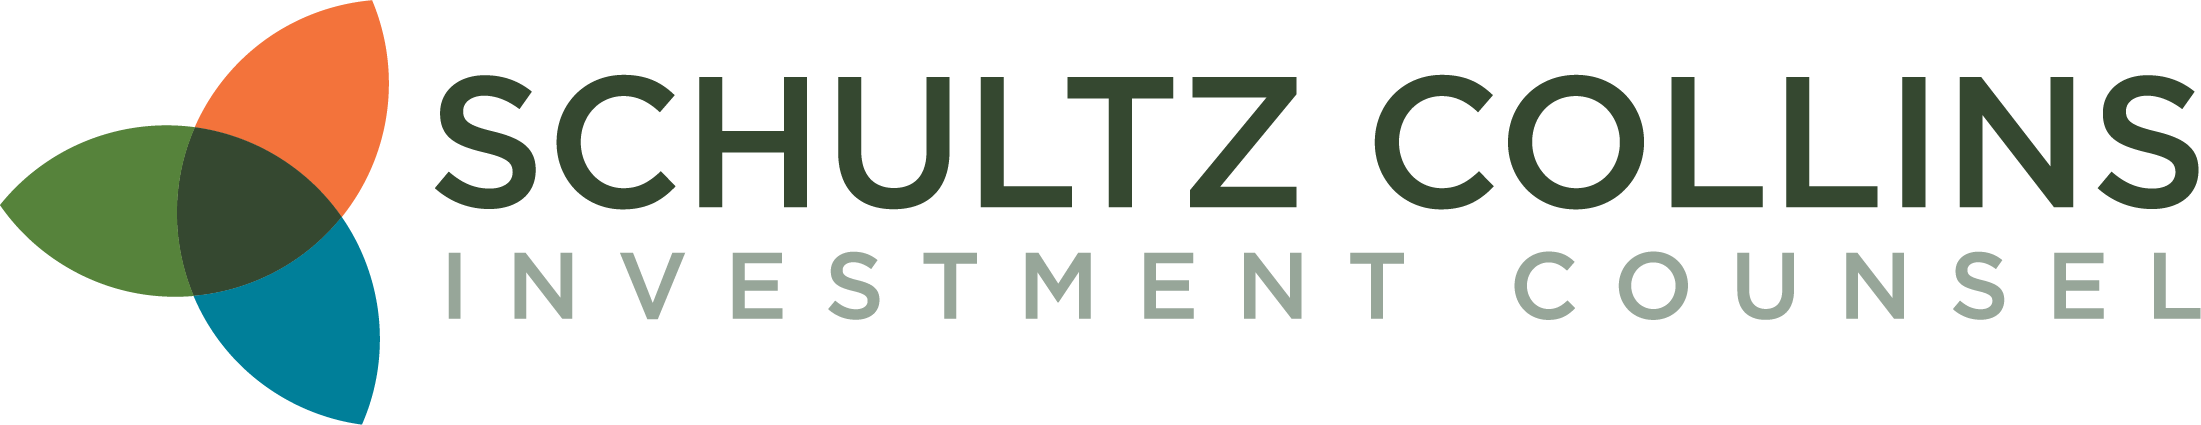 Schultz Collins Investment Counsel reviews